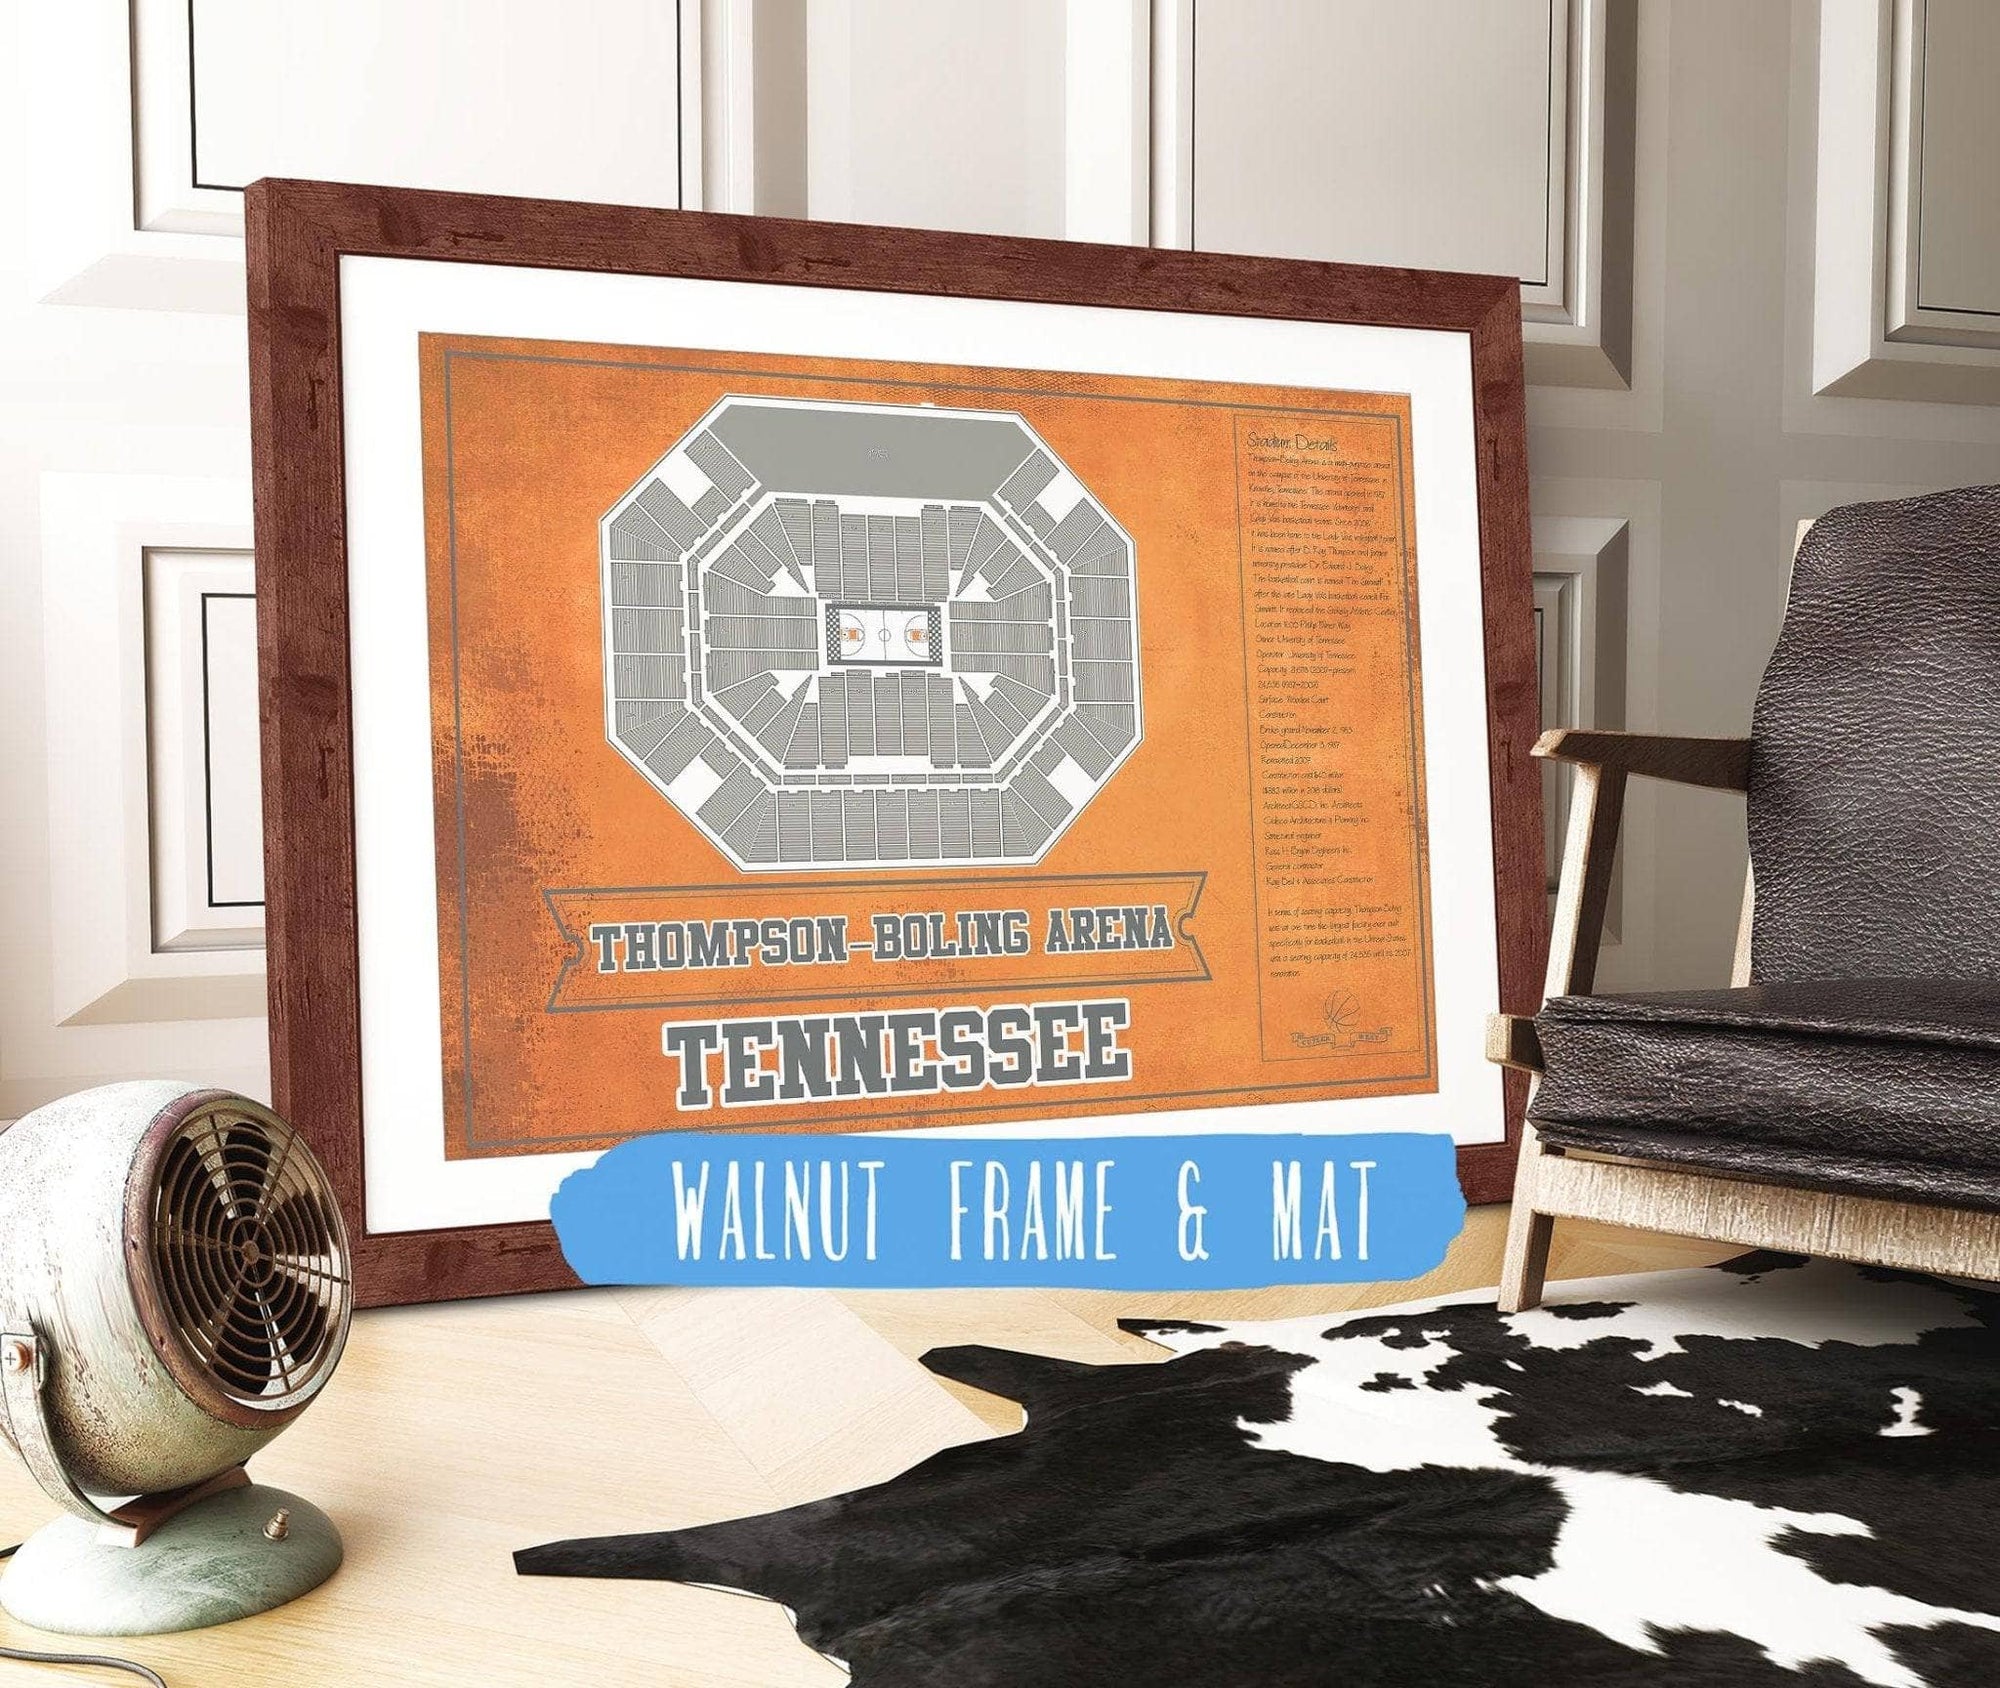 Cutler West Basketball Collection 14" x 11" / Walnut Frame & Mat Thompson–Boling Arena - Tennessee Volunteers, Lady Vols NCAA College Basketball Blueprint Art 93335021484750